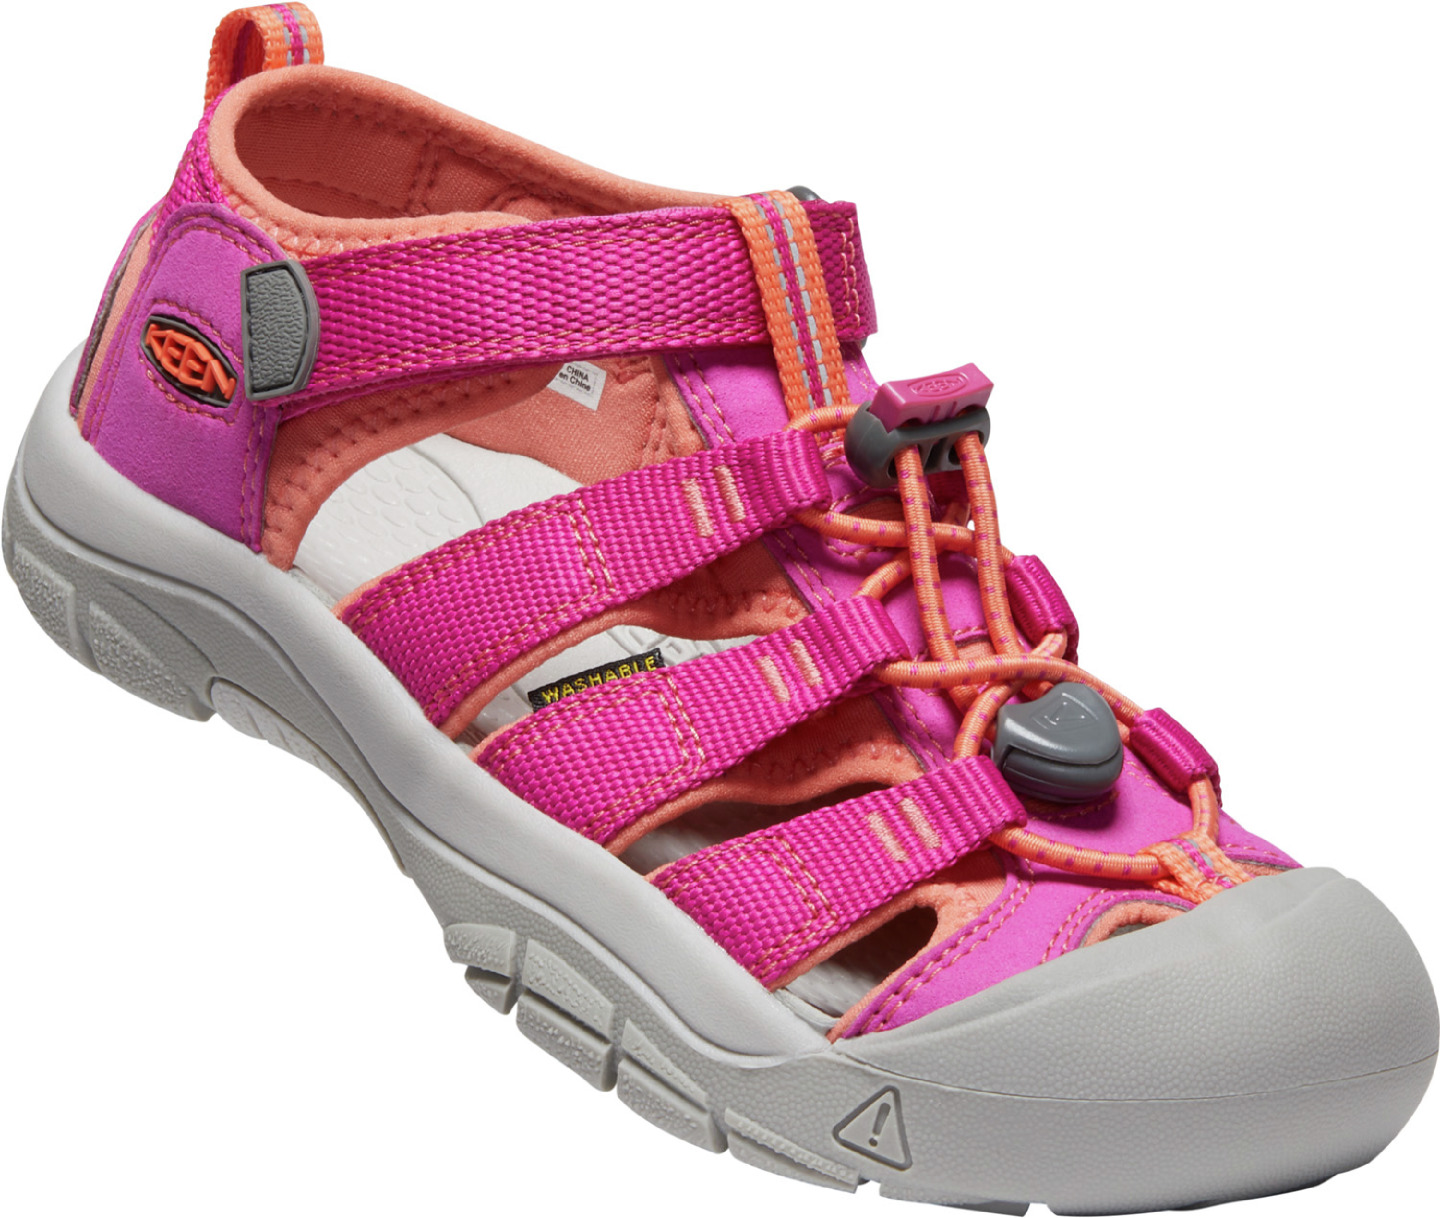 Keen dětské sandály Newport H2 Youth Very Berry/Fusion Coral Barva: very berry/fusion coral, Velikost: 6 UK (39 EU / 25,5 cm)